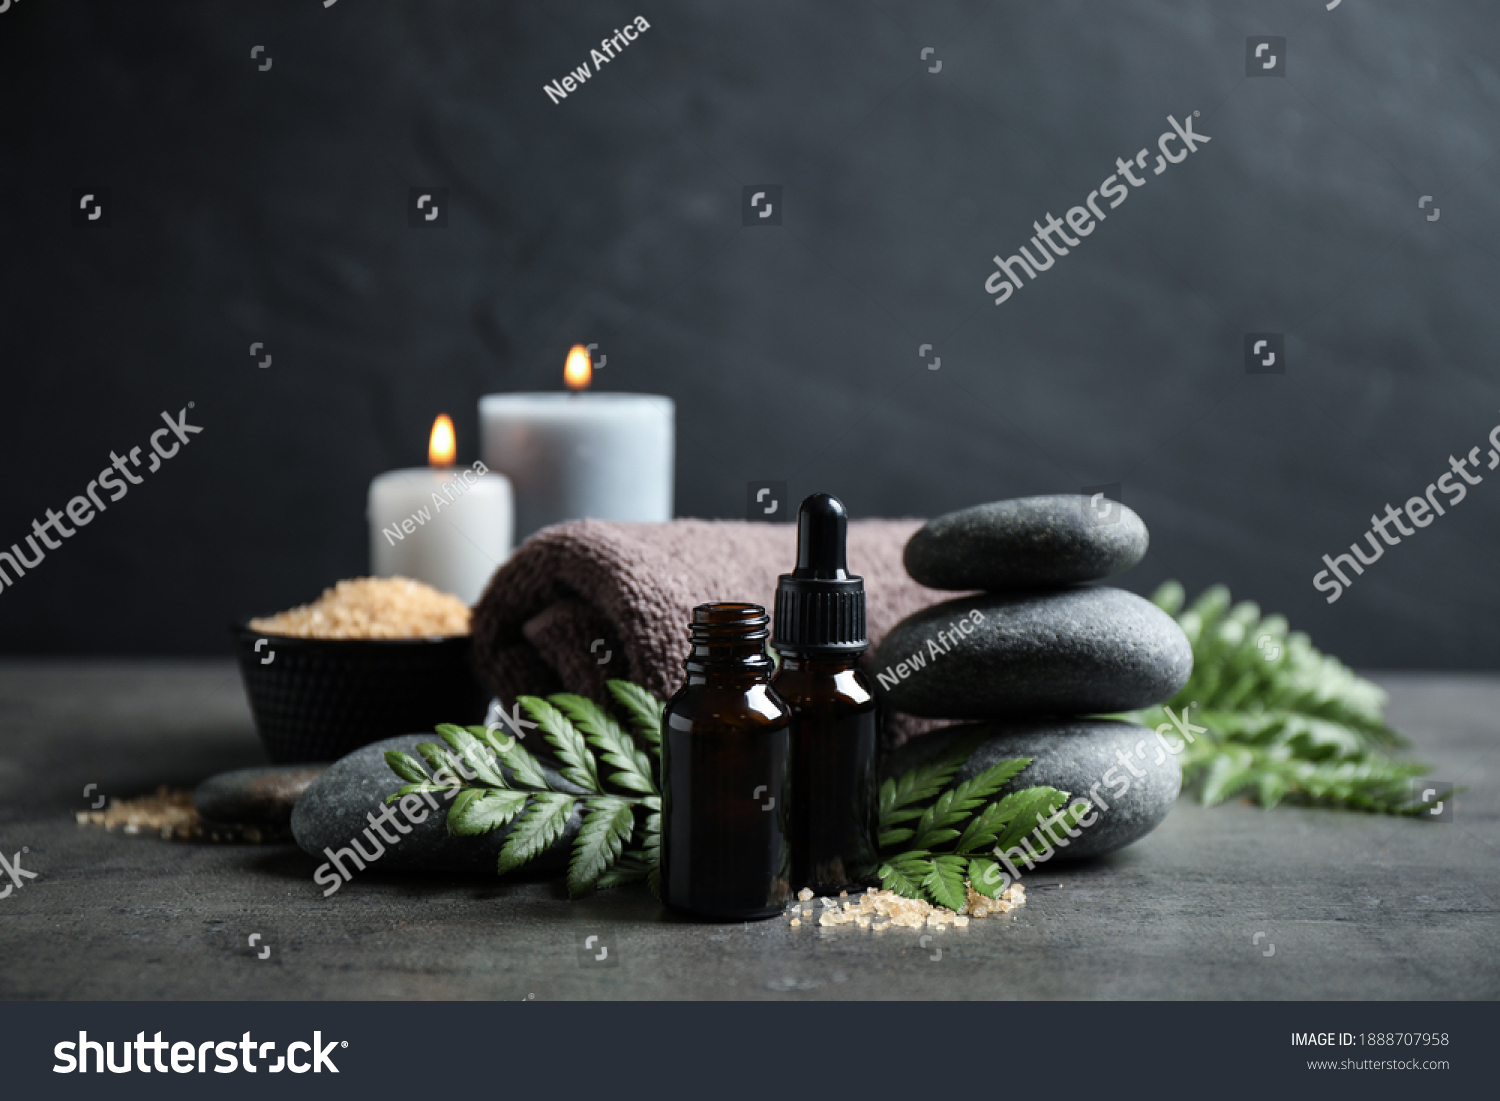 Spa composition with aroma oil on grey table #1888707958